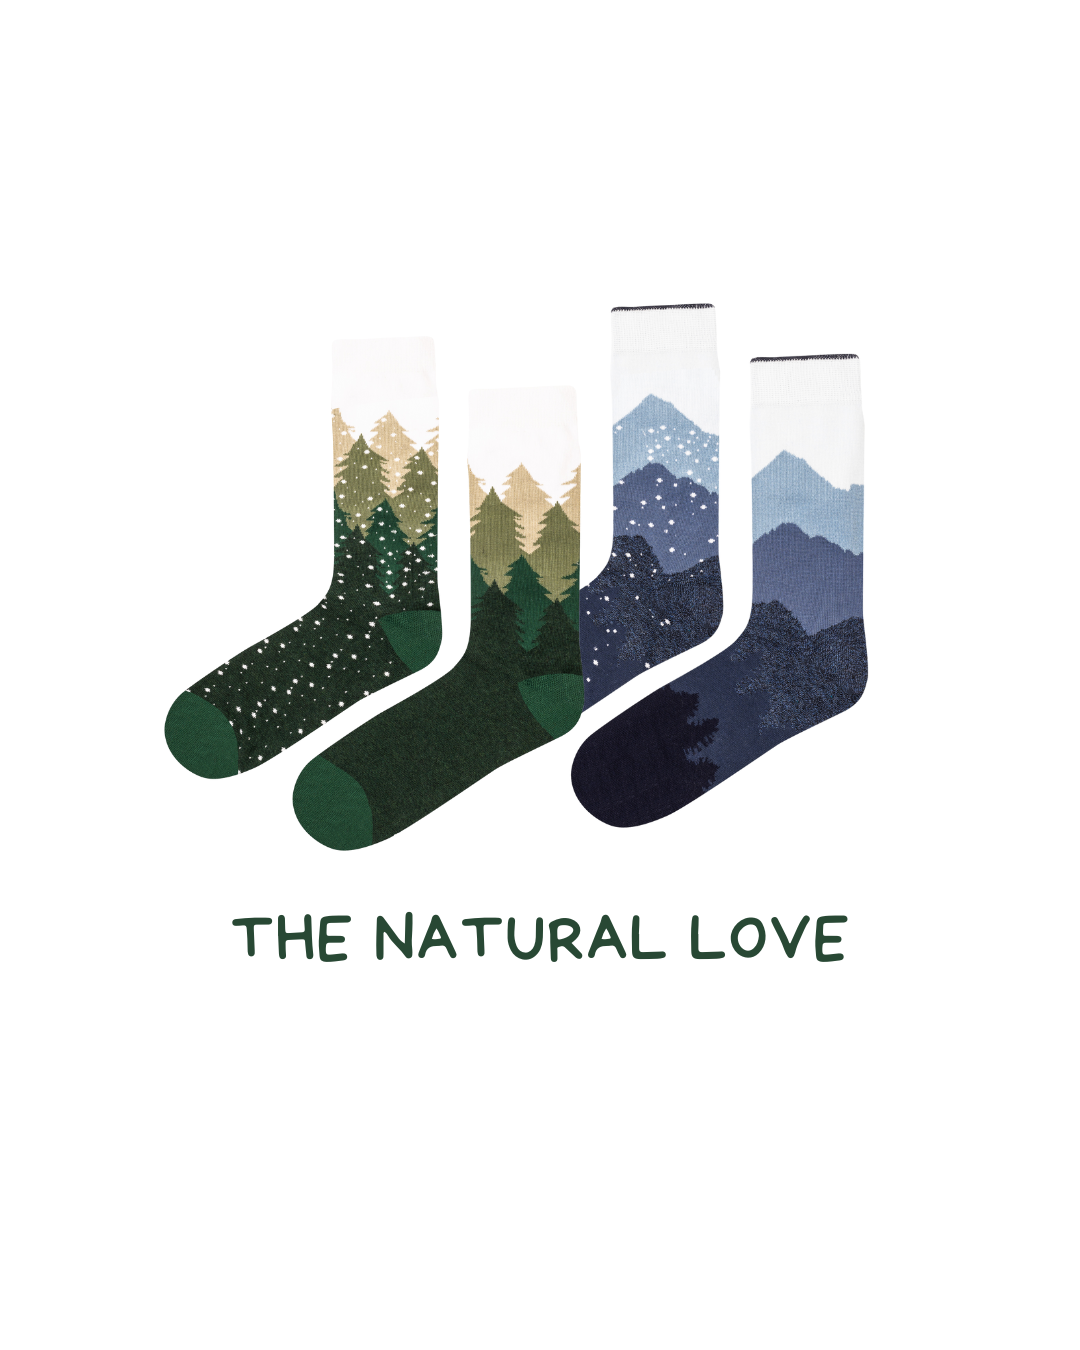 The Natural Love